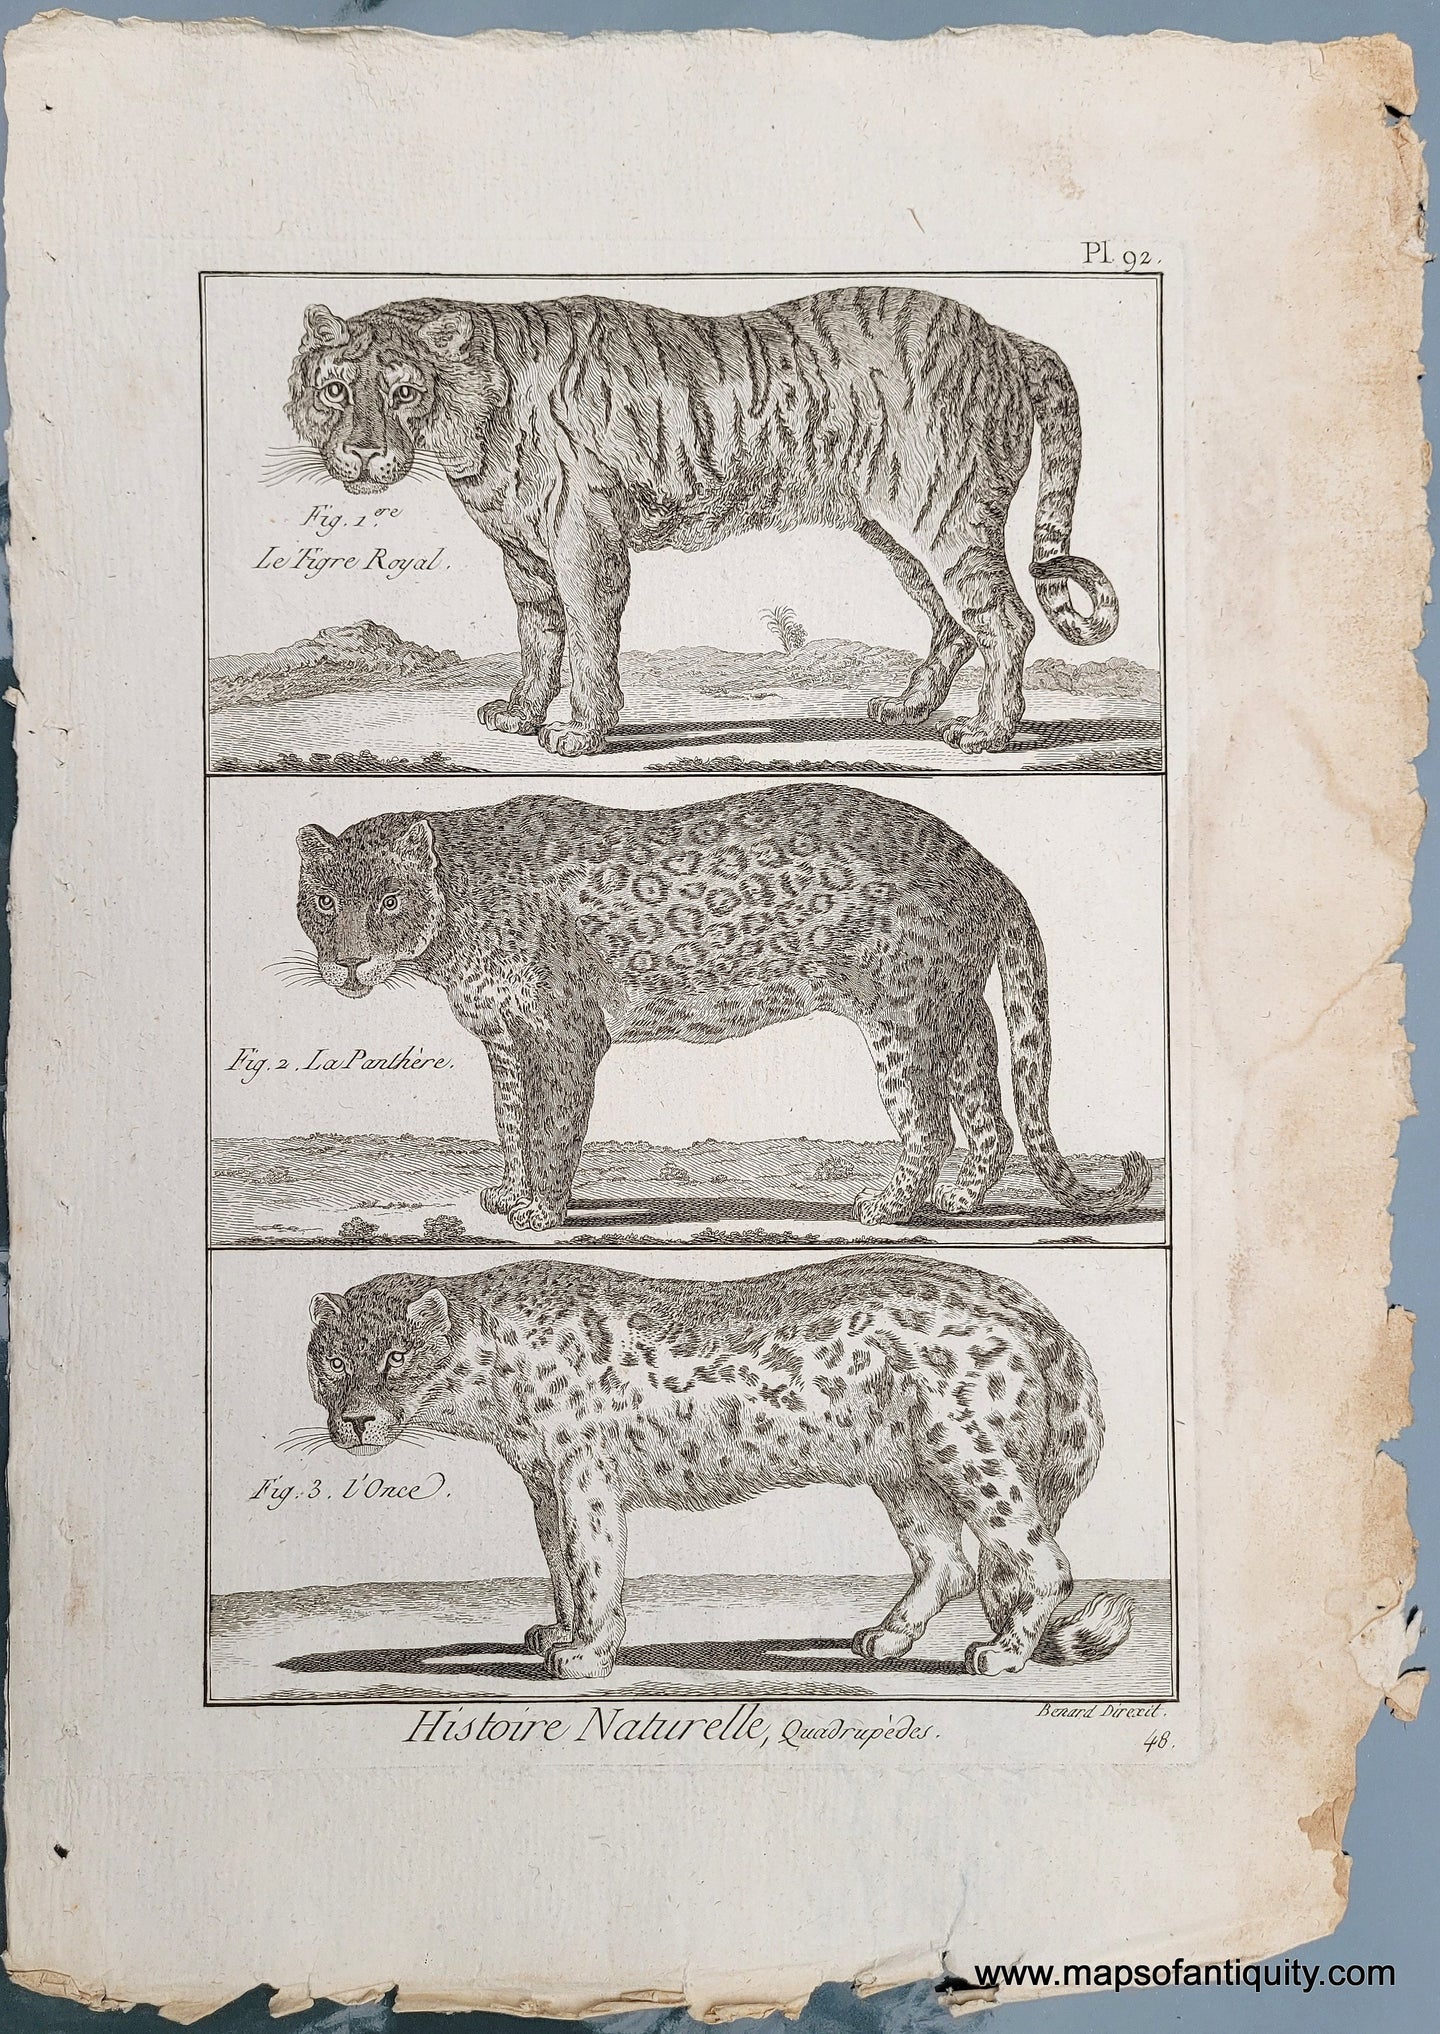 Genuine-Antique-Print-Antique-Print-of-a-Tiger-and-two-large-spotted-cats-1800-Benard-Direxit-Maps-Of-Antiquity